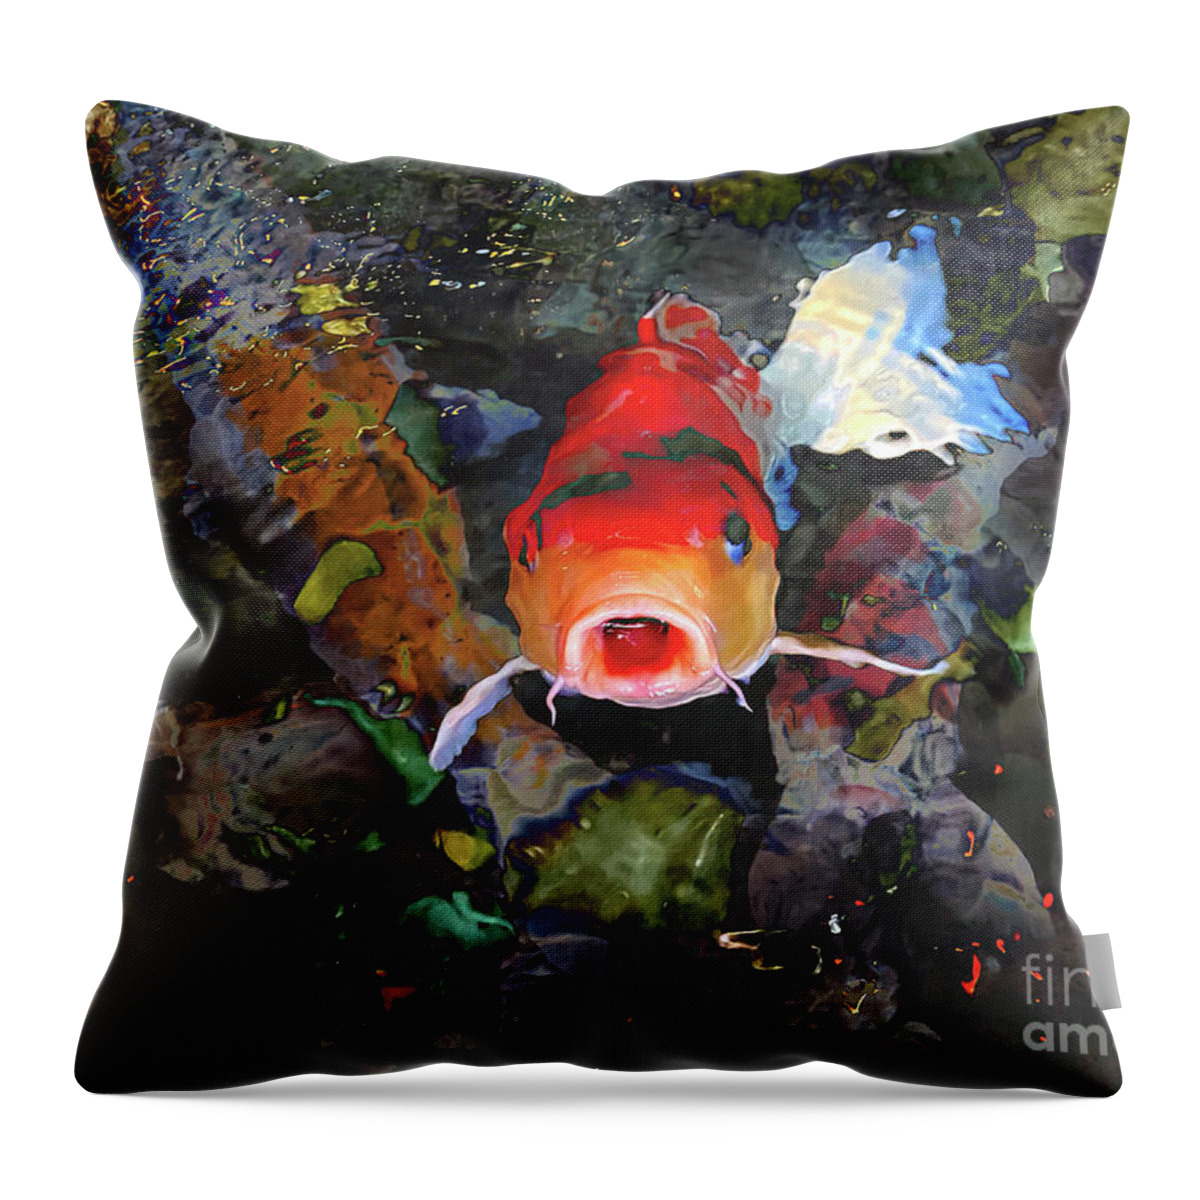 Fish Throw Pillow featuring the photograph Somethings Fishy by Katherine Erickson